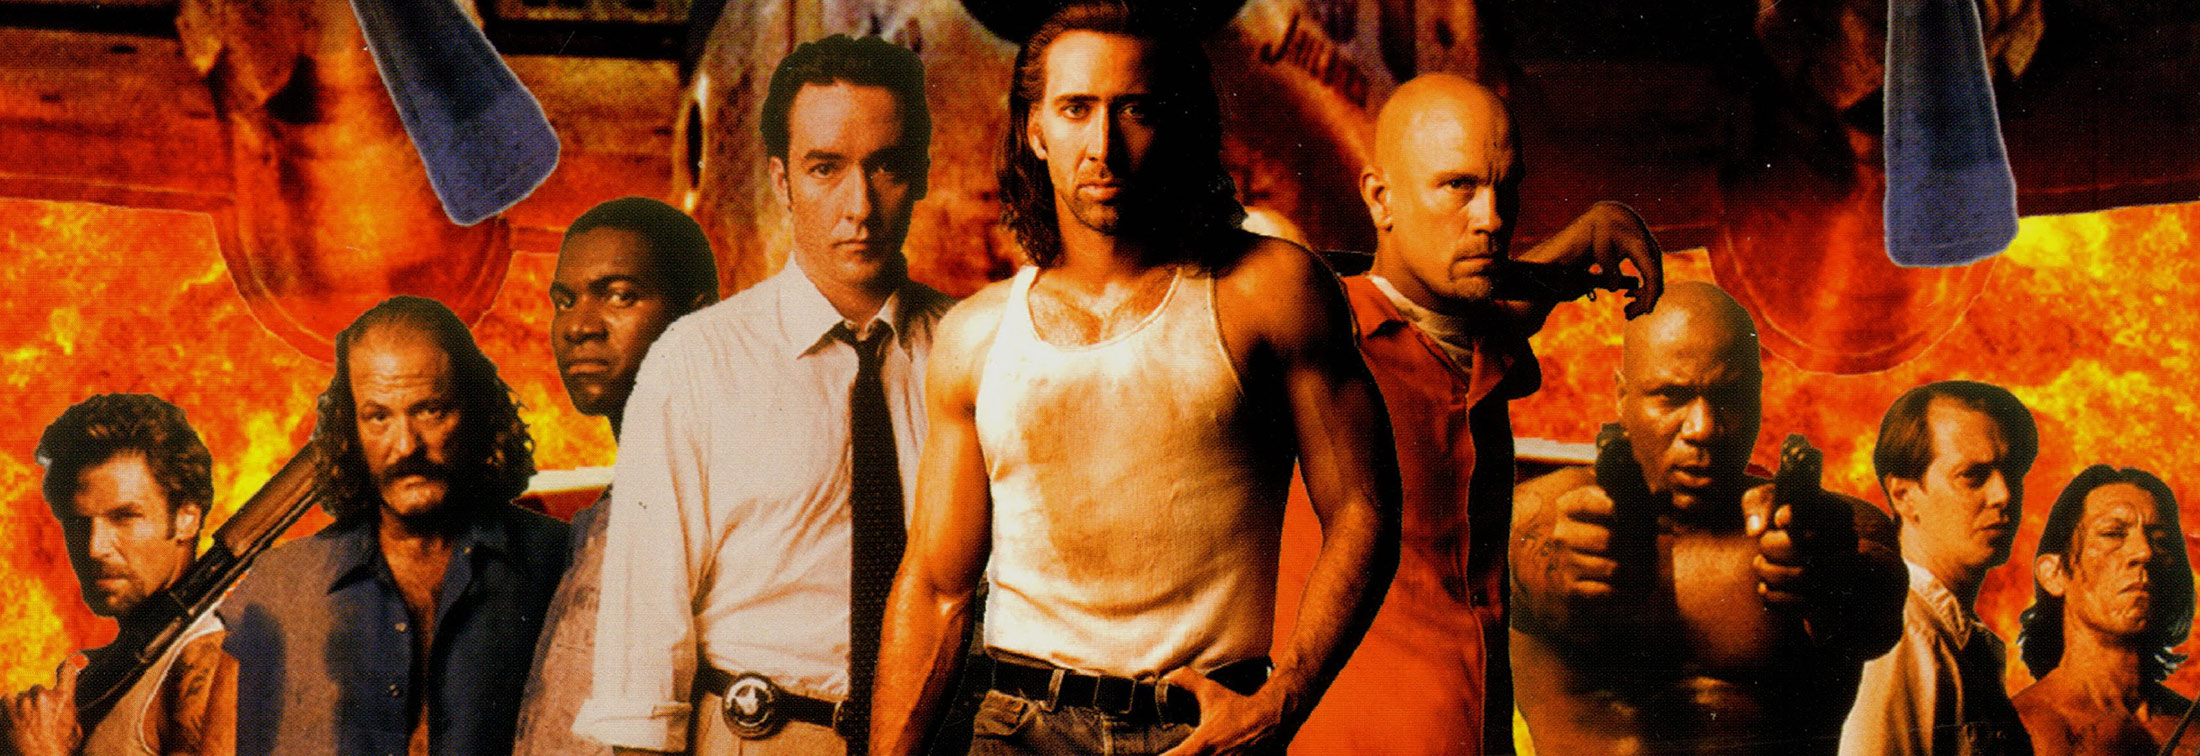 Cage-A-Thon - Ranking Nicolas Cage throughout the ages